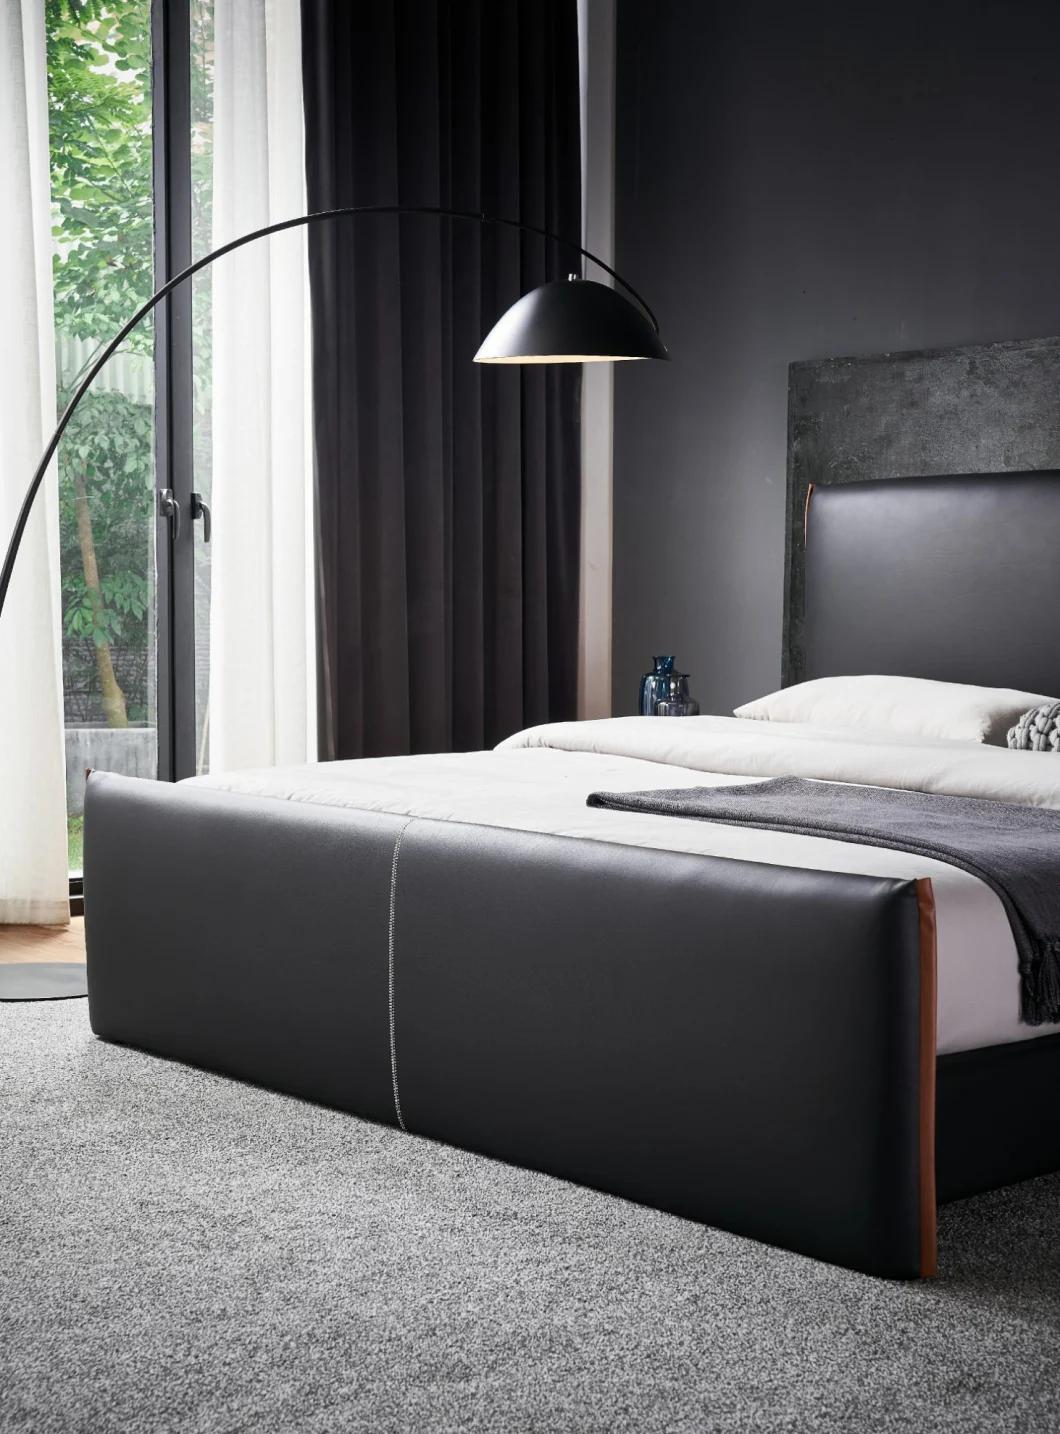 2021 New Bed modern Bedroom Set Bed Furniture King Bed Wall Bed a-GF005